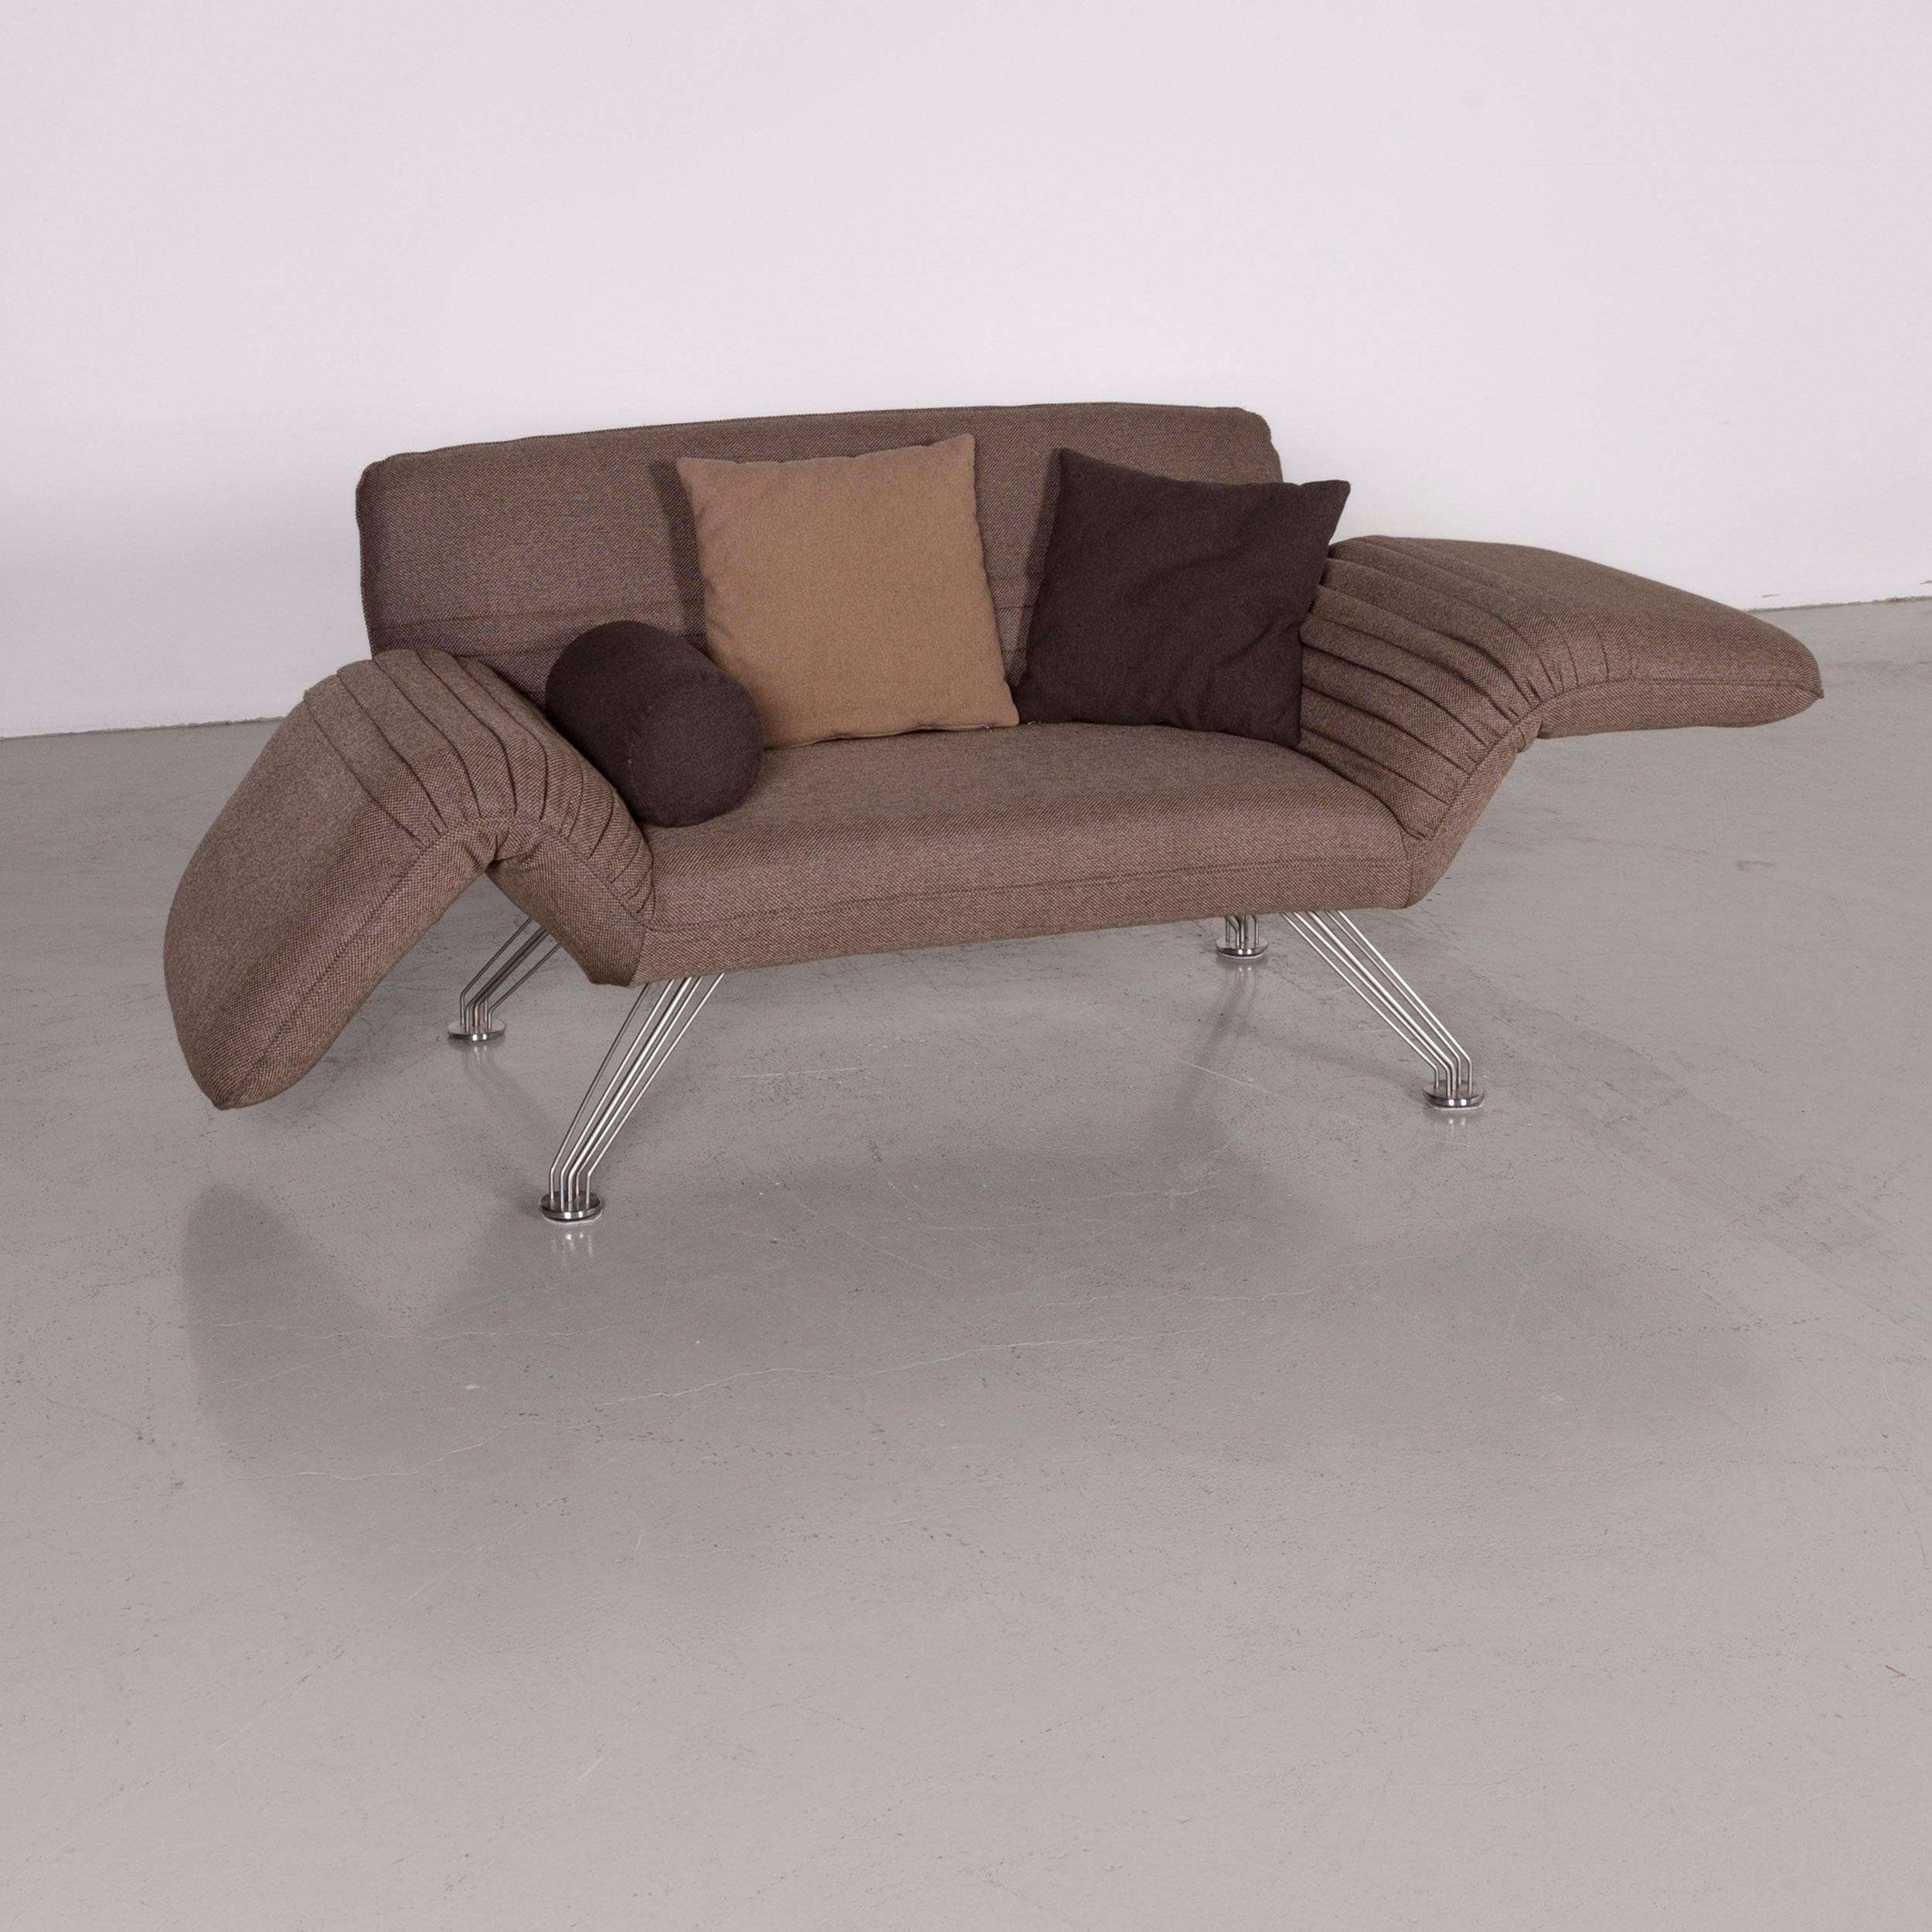 De Sede DS 142 designer fabric sofa brown two-seat function couch.